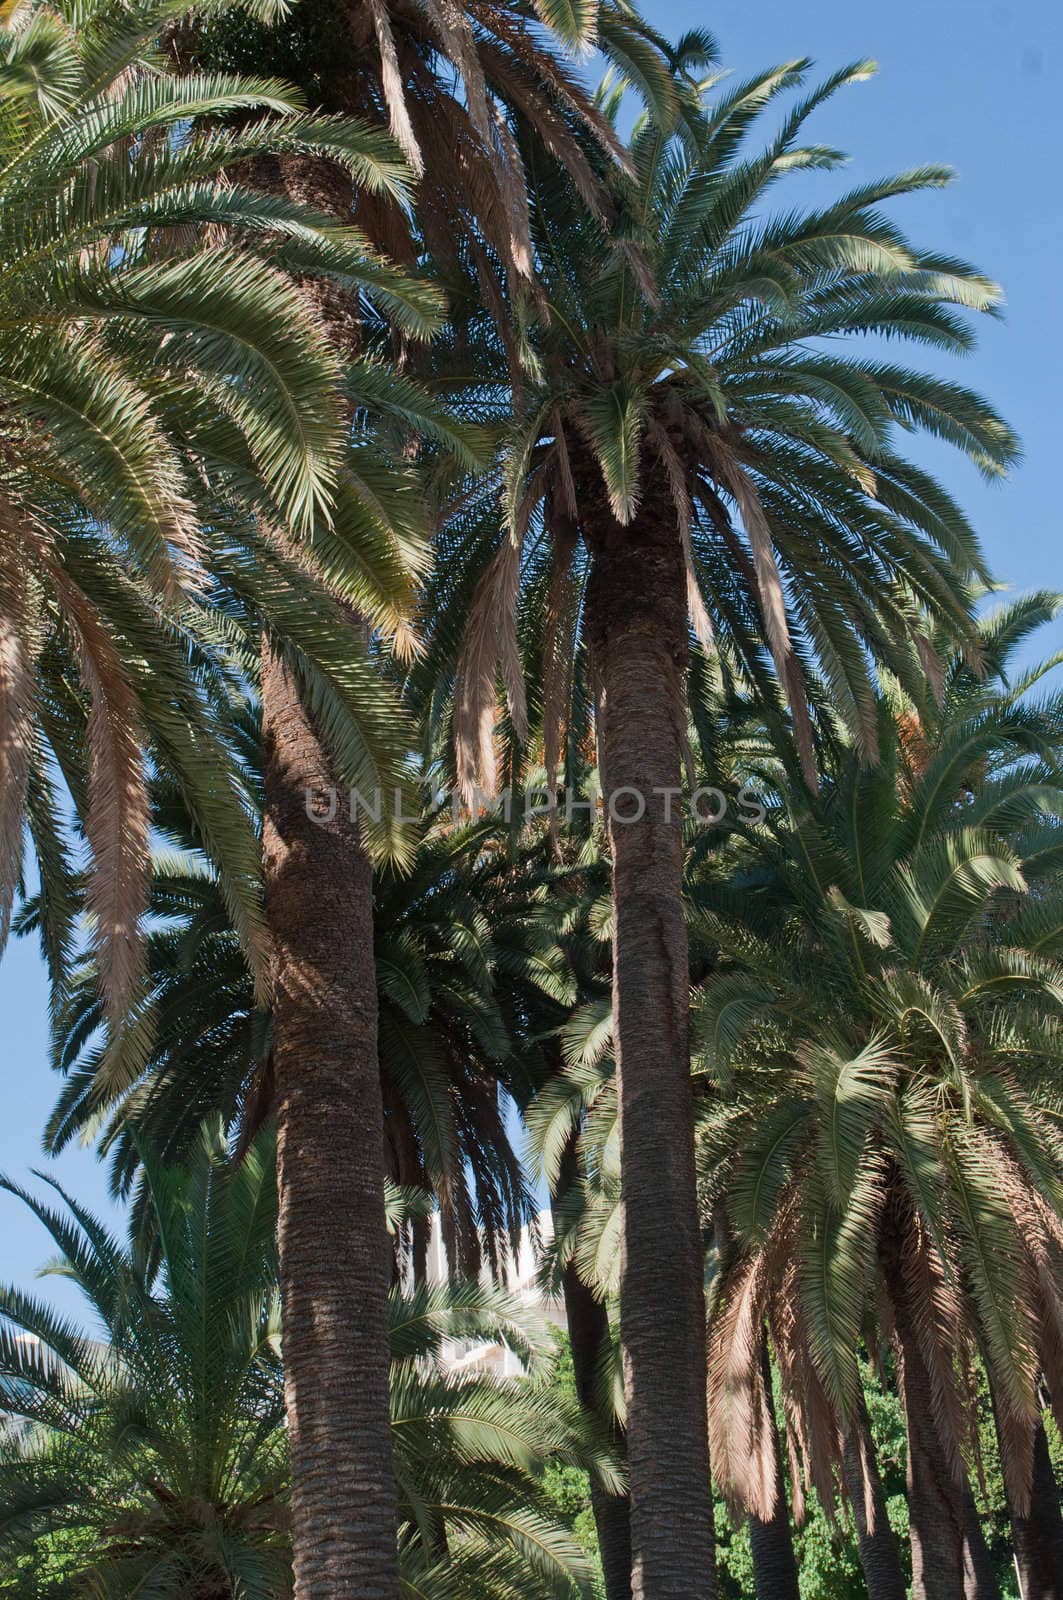 Date-palm trees against the blue sky.